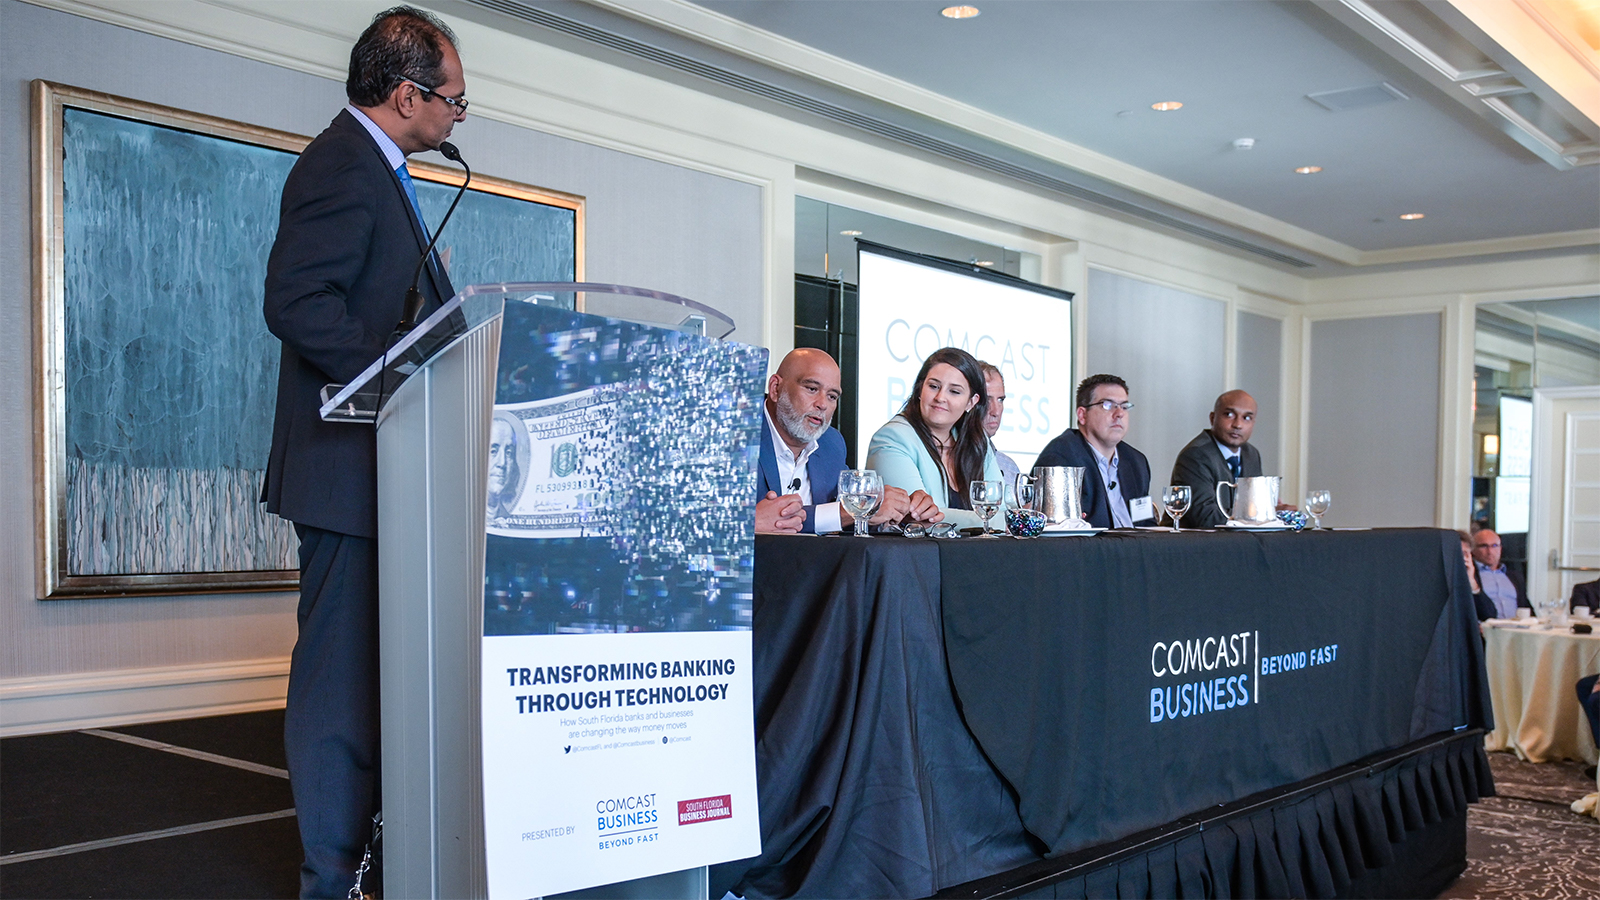 Panelists onstage at the Transforming Banking Through Technology panel.